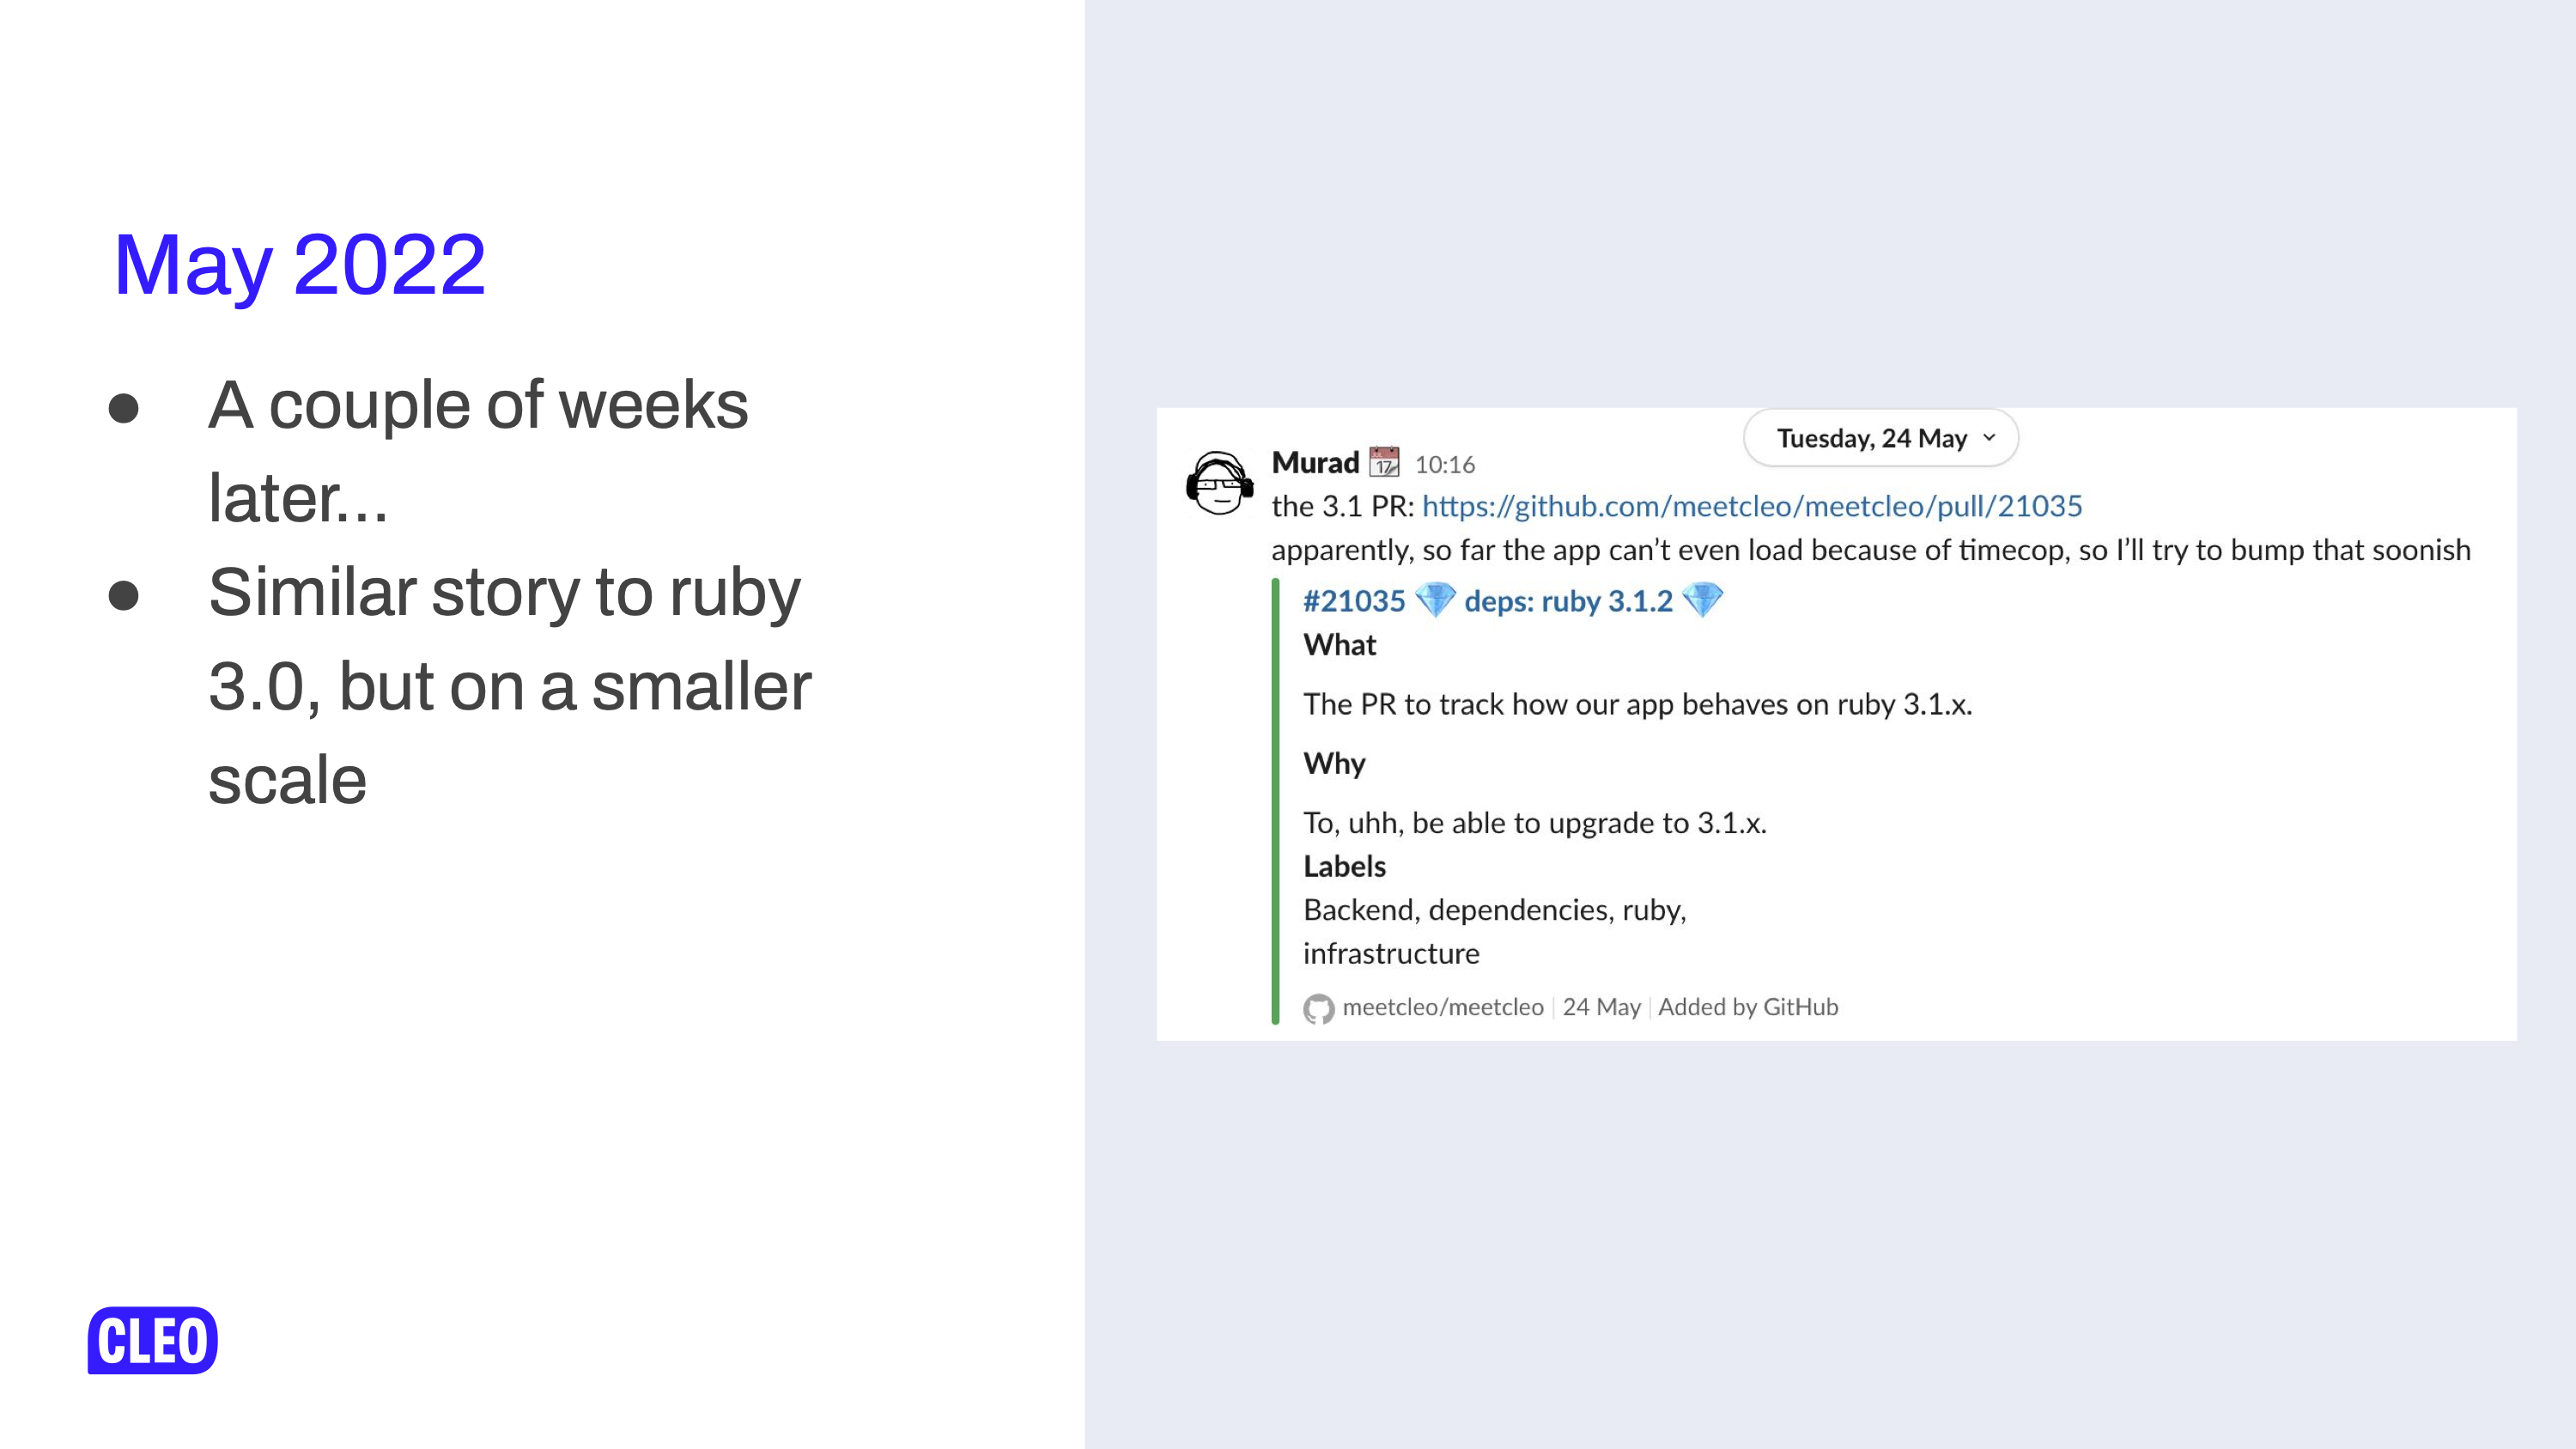 Another image of a PR announcement in slack, this time also May 2022, but for ruby 3.1; text: May 2022, A couple of weeks later..., similar story to ruby 3.0 but on a smaller scale